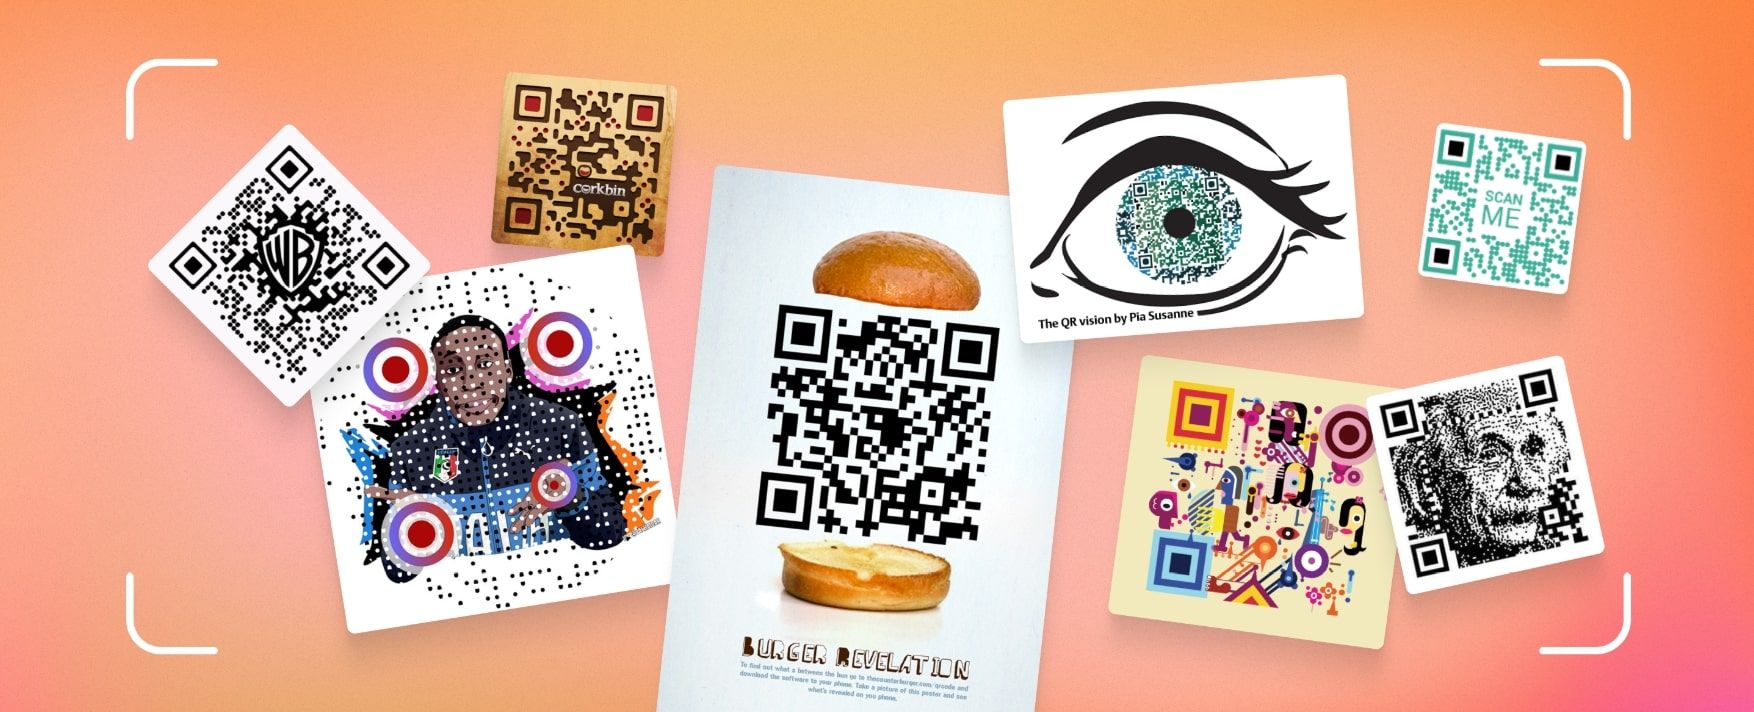 Different Creative Uses of QR codes